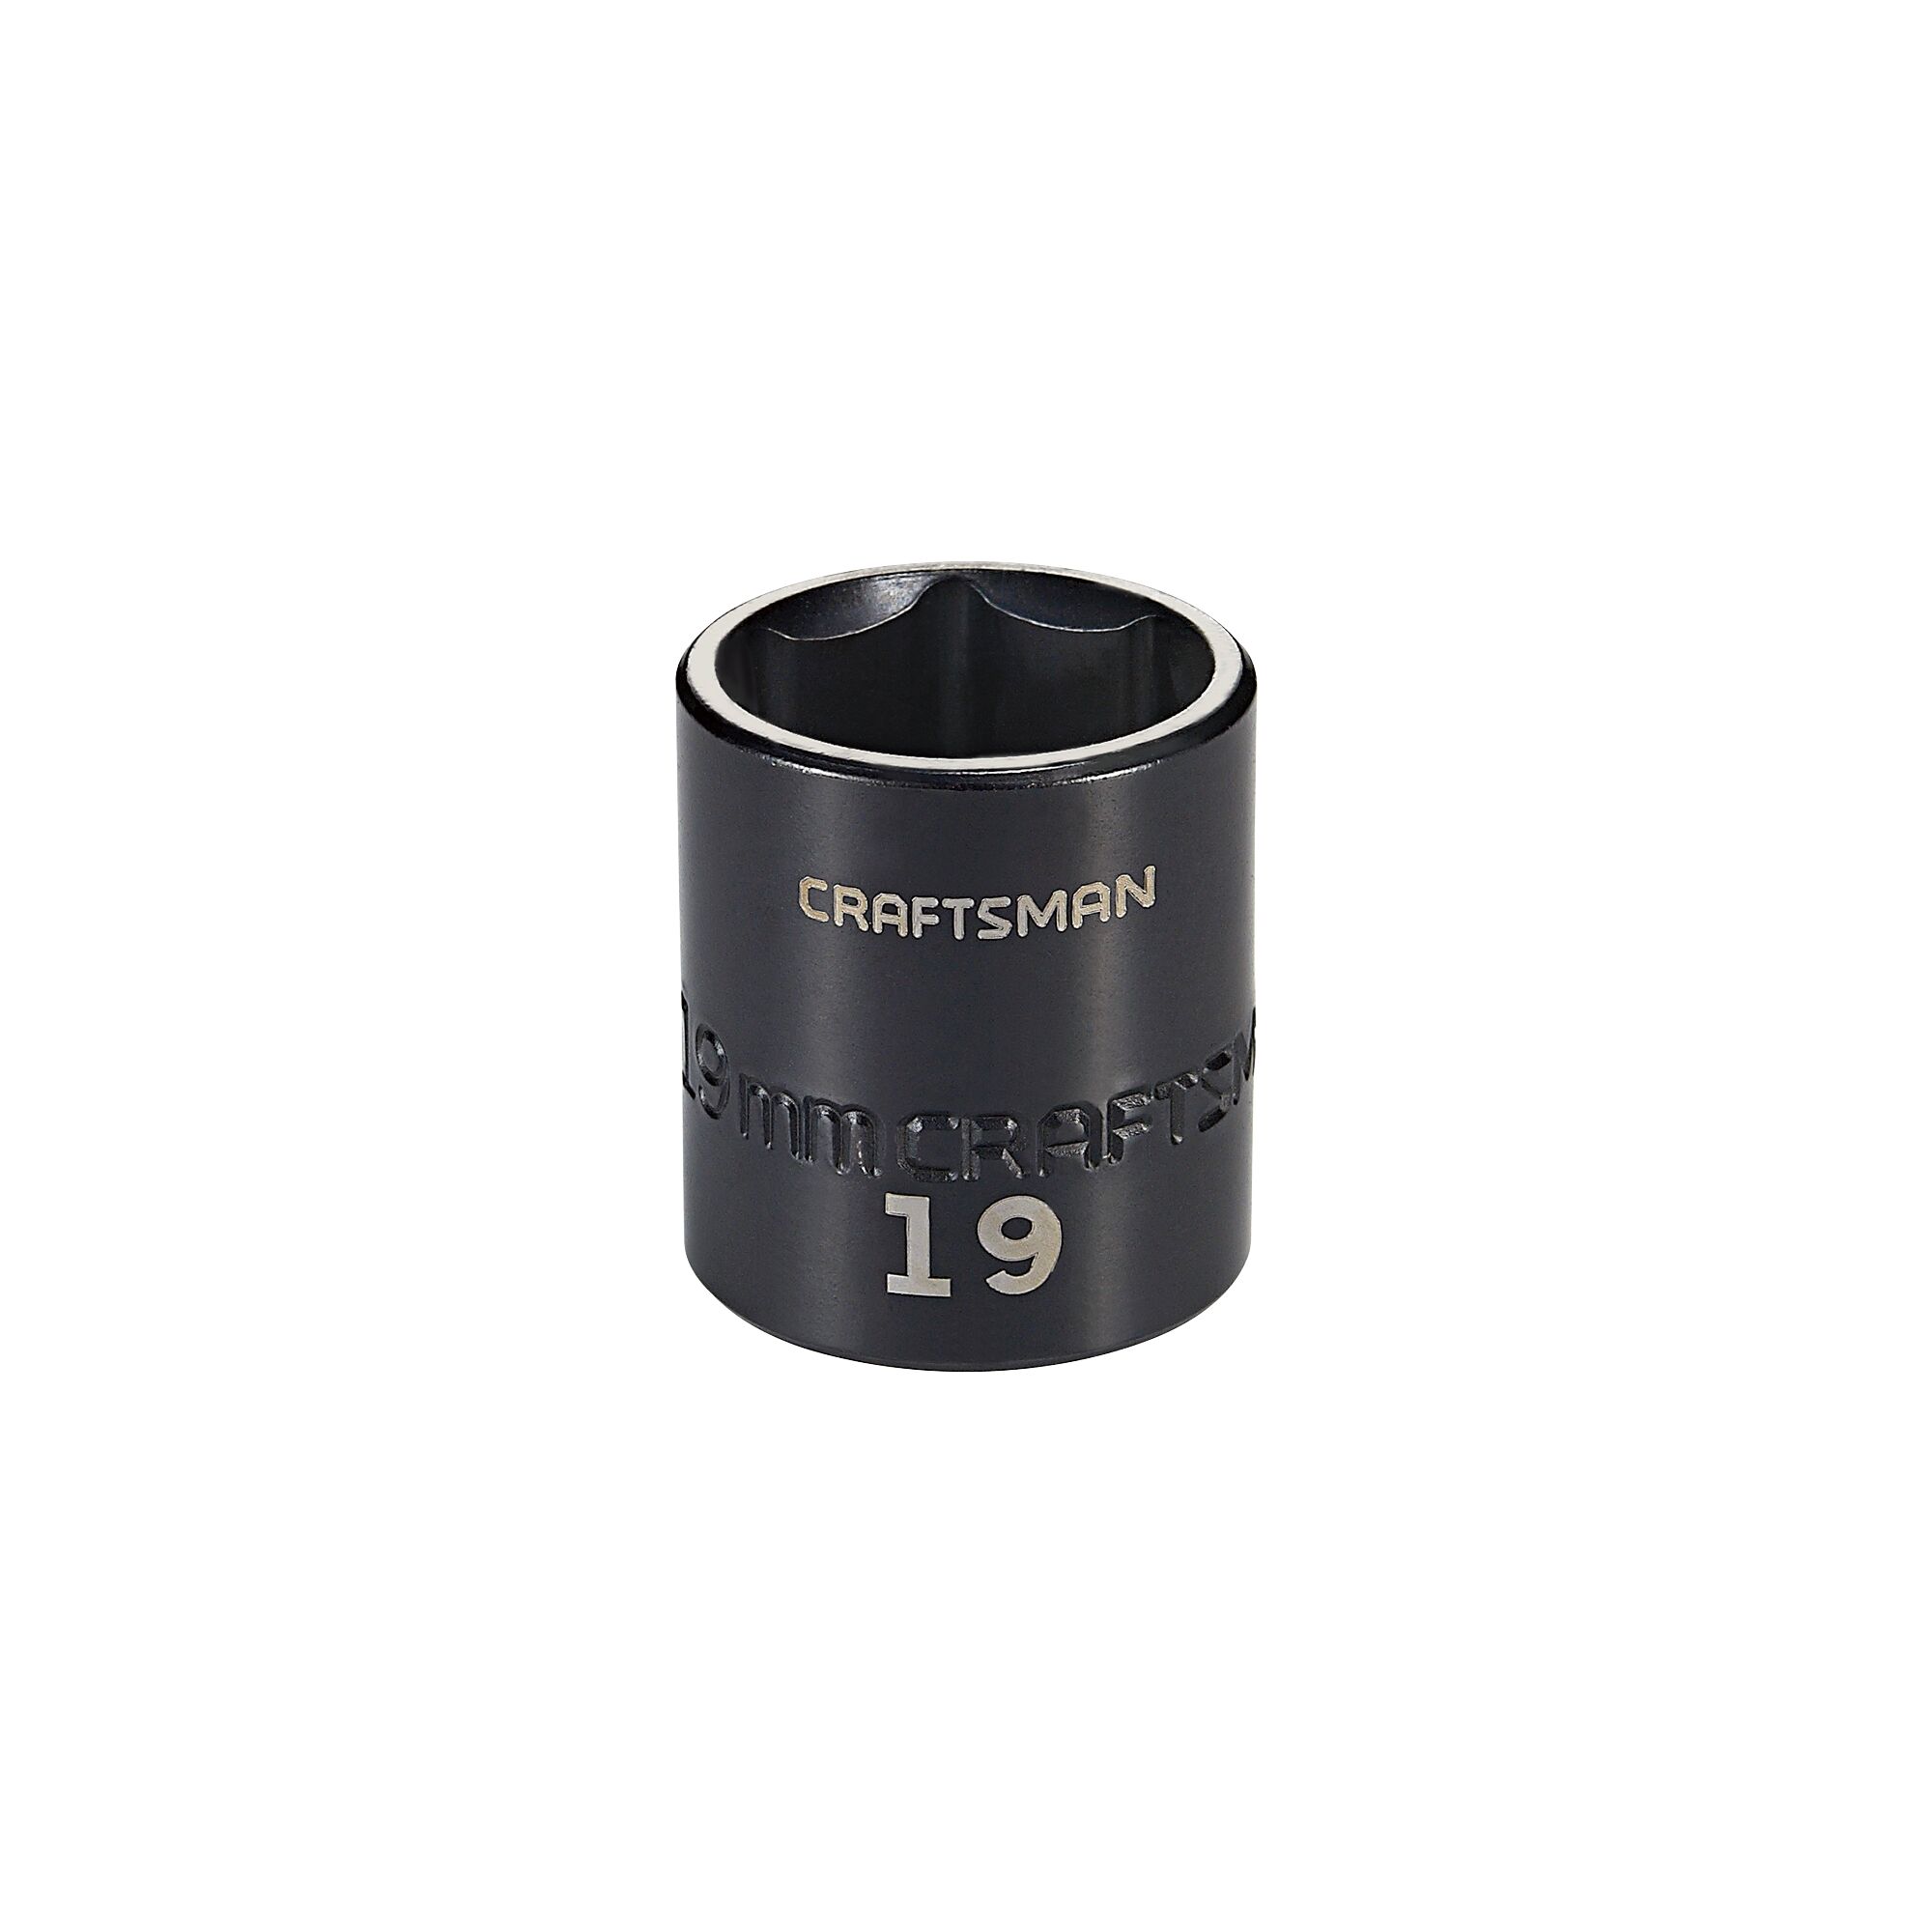 3 eighths inch 19 millimeter metric impact shallow socket.